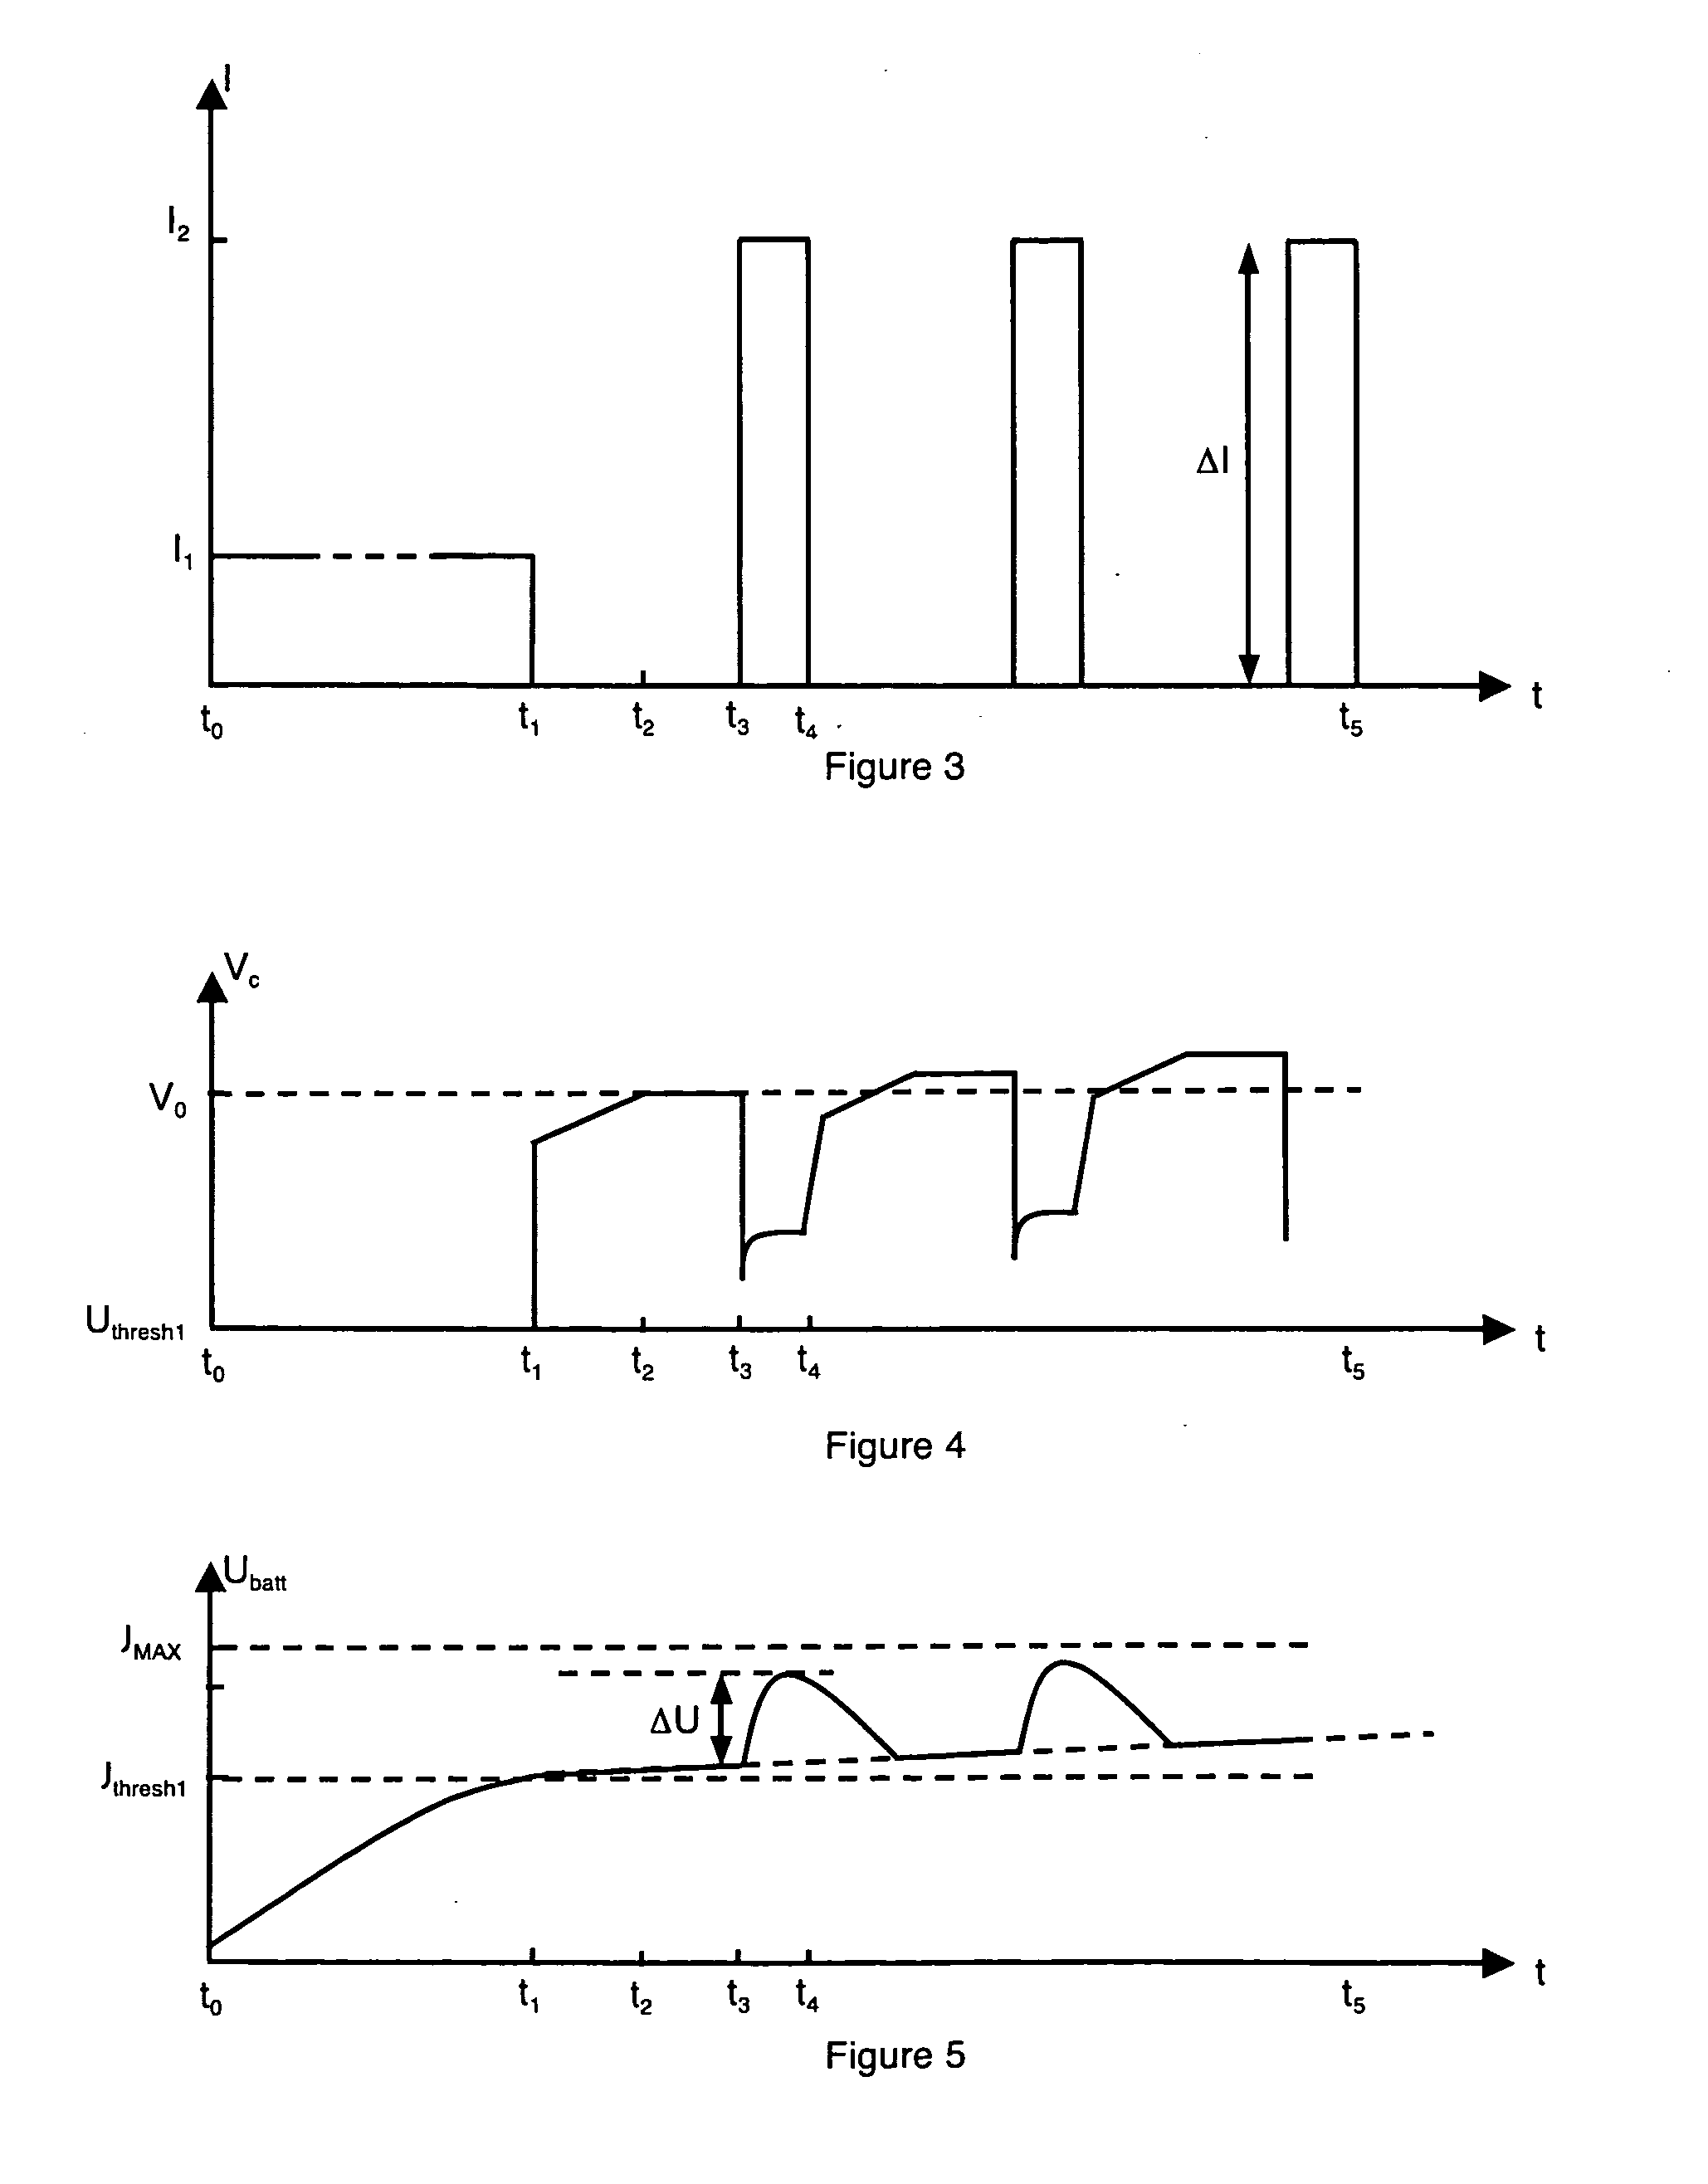 Method for pulsed charging of a battery in an autonomous system comprising a supercapacitance